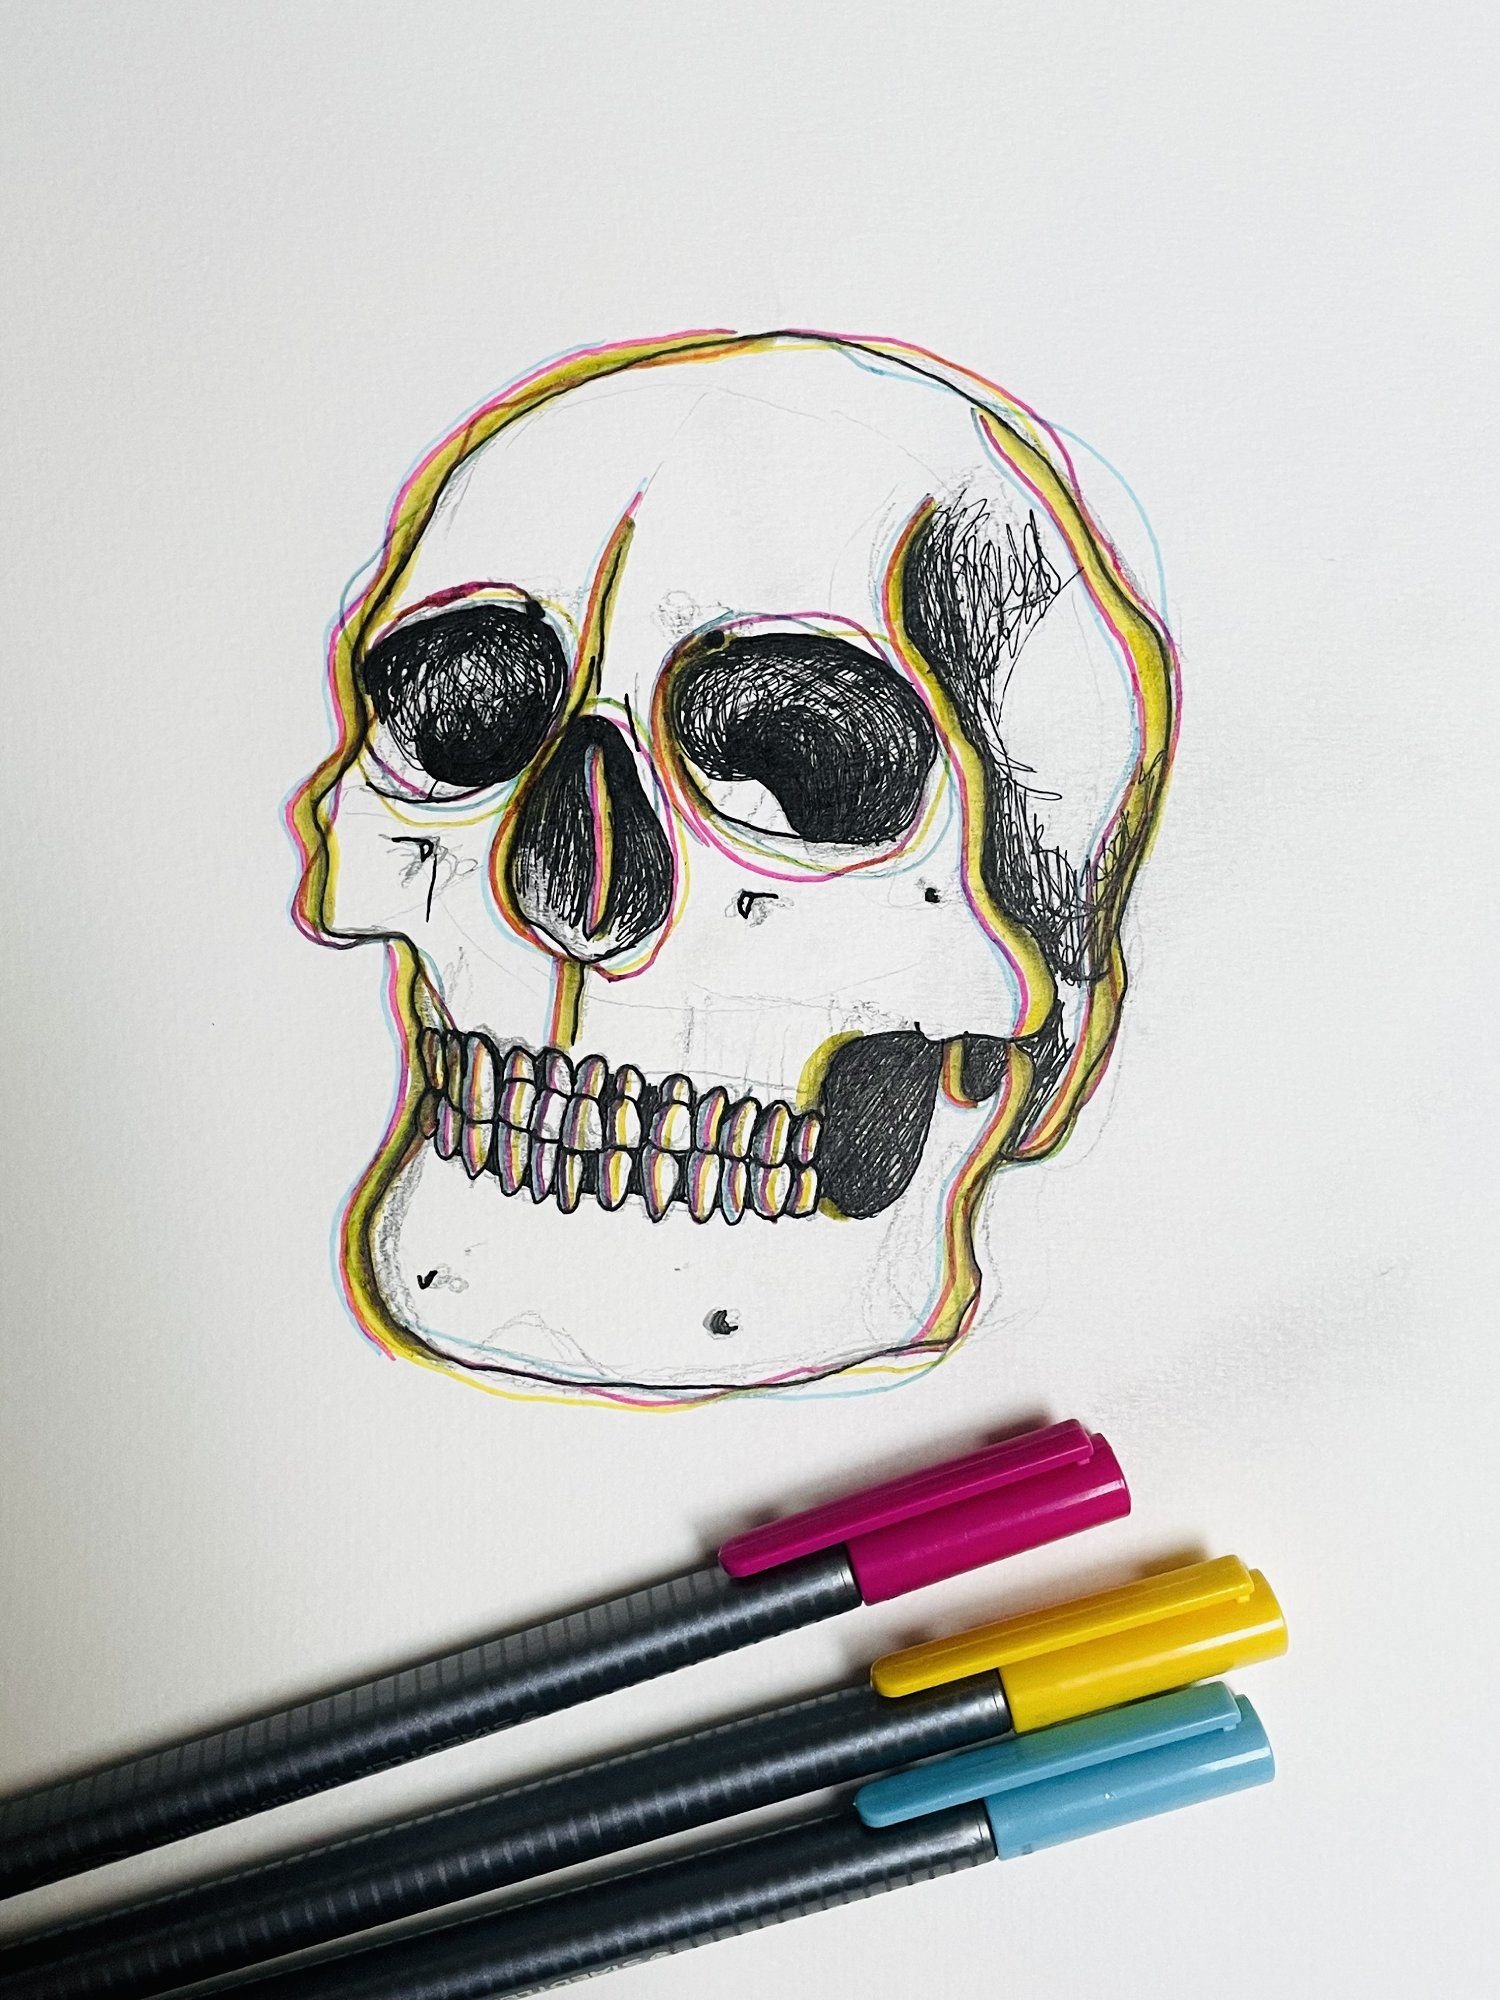 A sketch of a skull made with a pencil and coloured pens